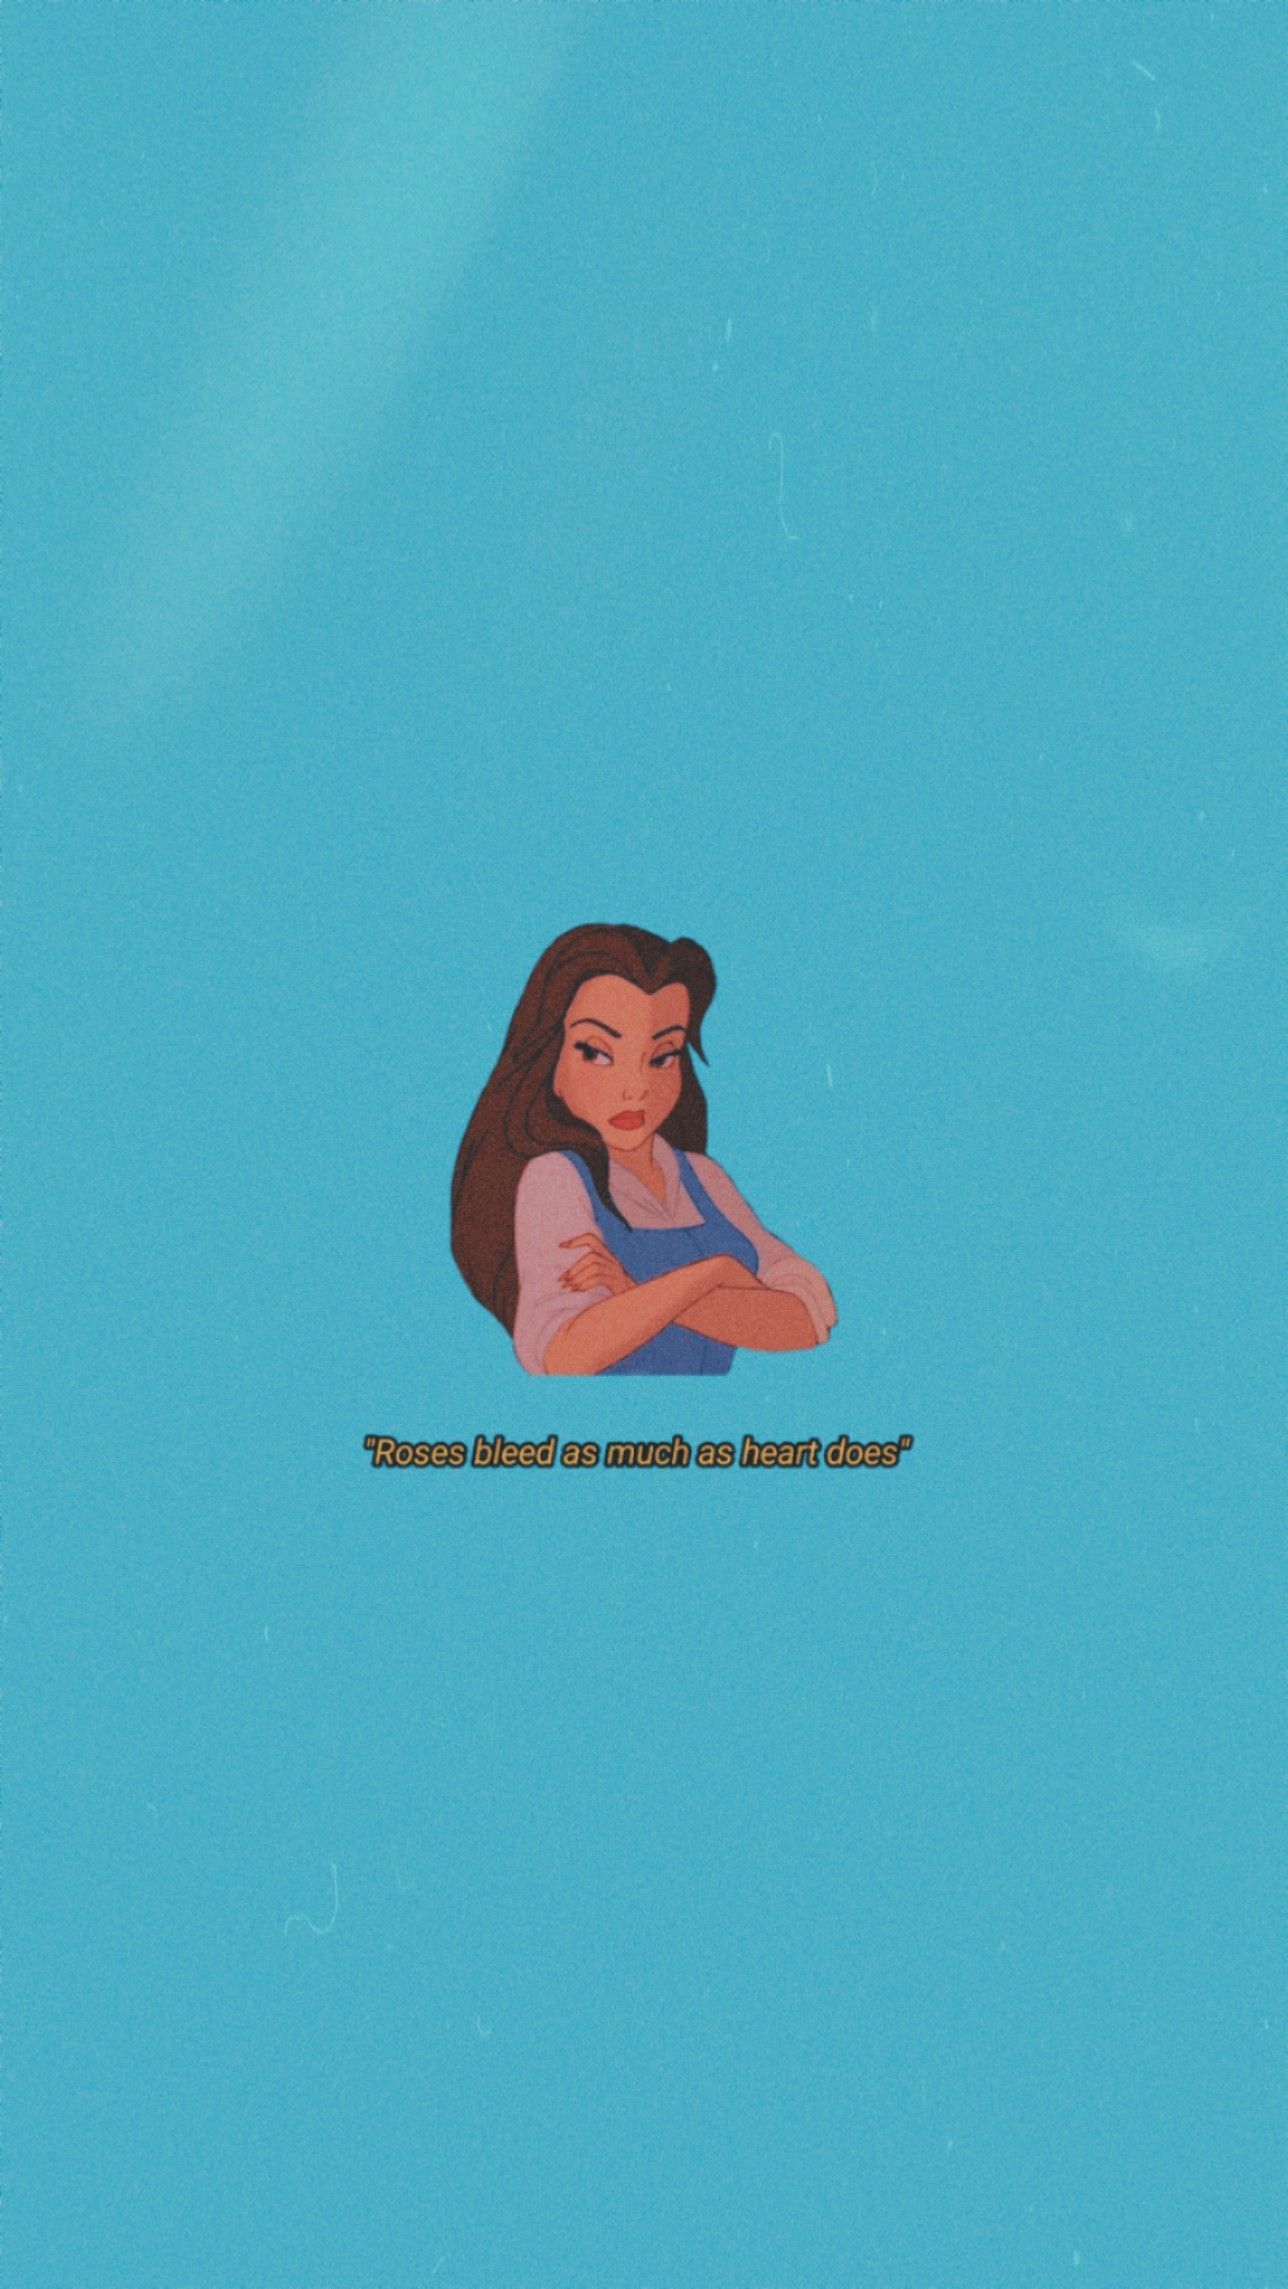 A blue background with an animated woman on it - Belle